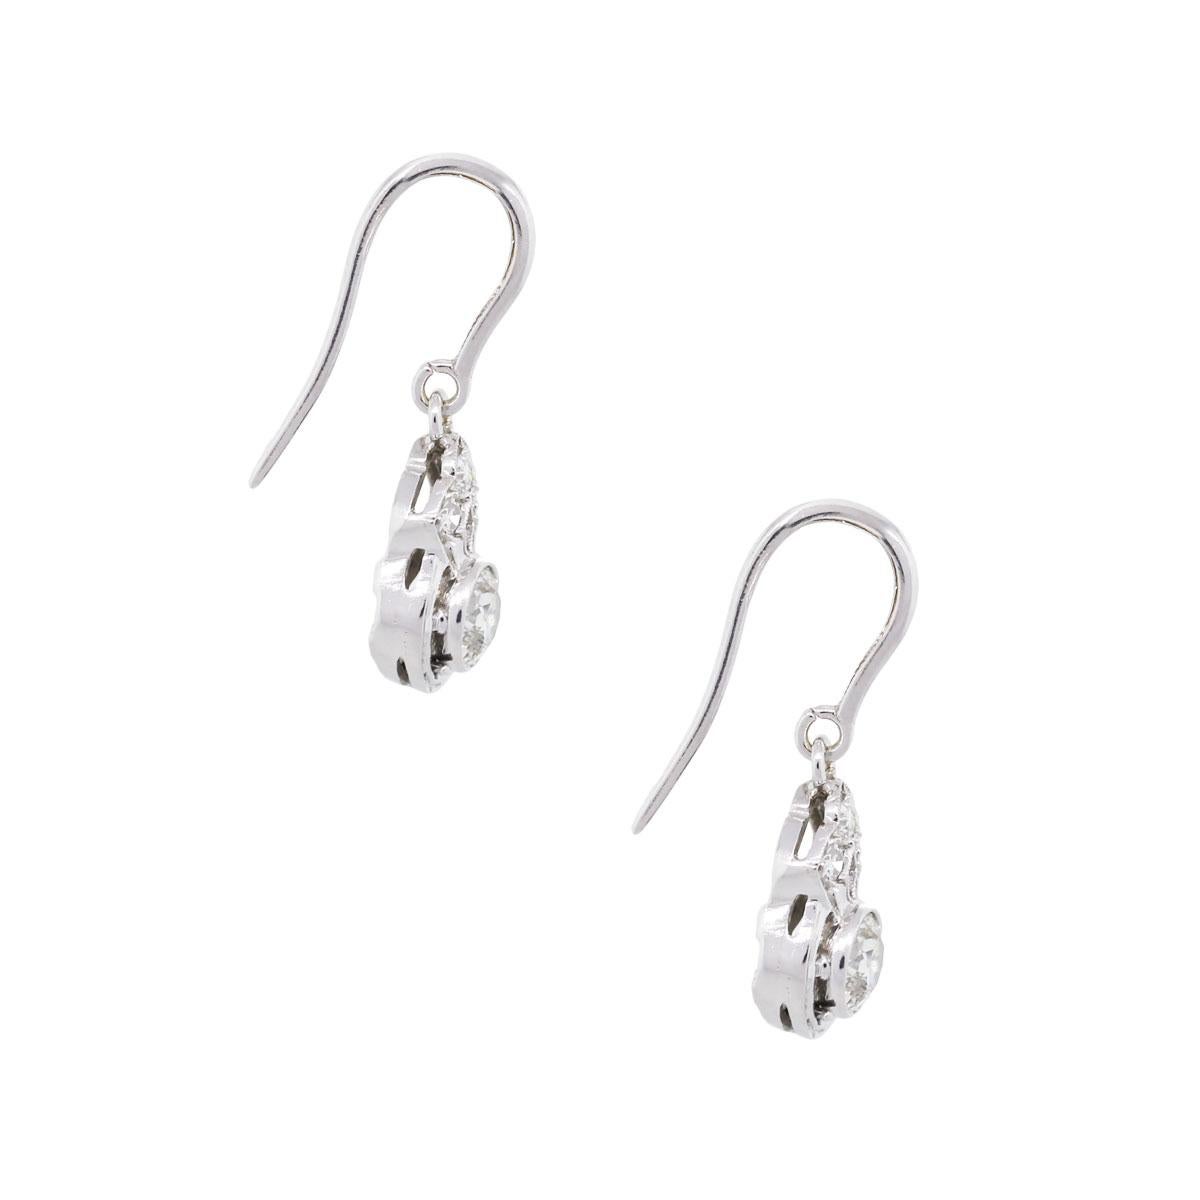 Material: 14k white gold
Diamond Details: Approximately 1.25ctw of round brilliant diamonds. Diamonds are G/H in color and SI in clarity.
Earring Measurements: 0.94″ x 0.19″ x 0.30″
Earring Backs: Hooks
Total Weight: 3.2g (2.1dwt)
Additional